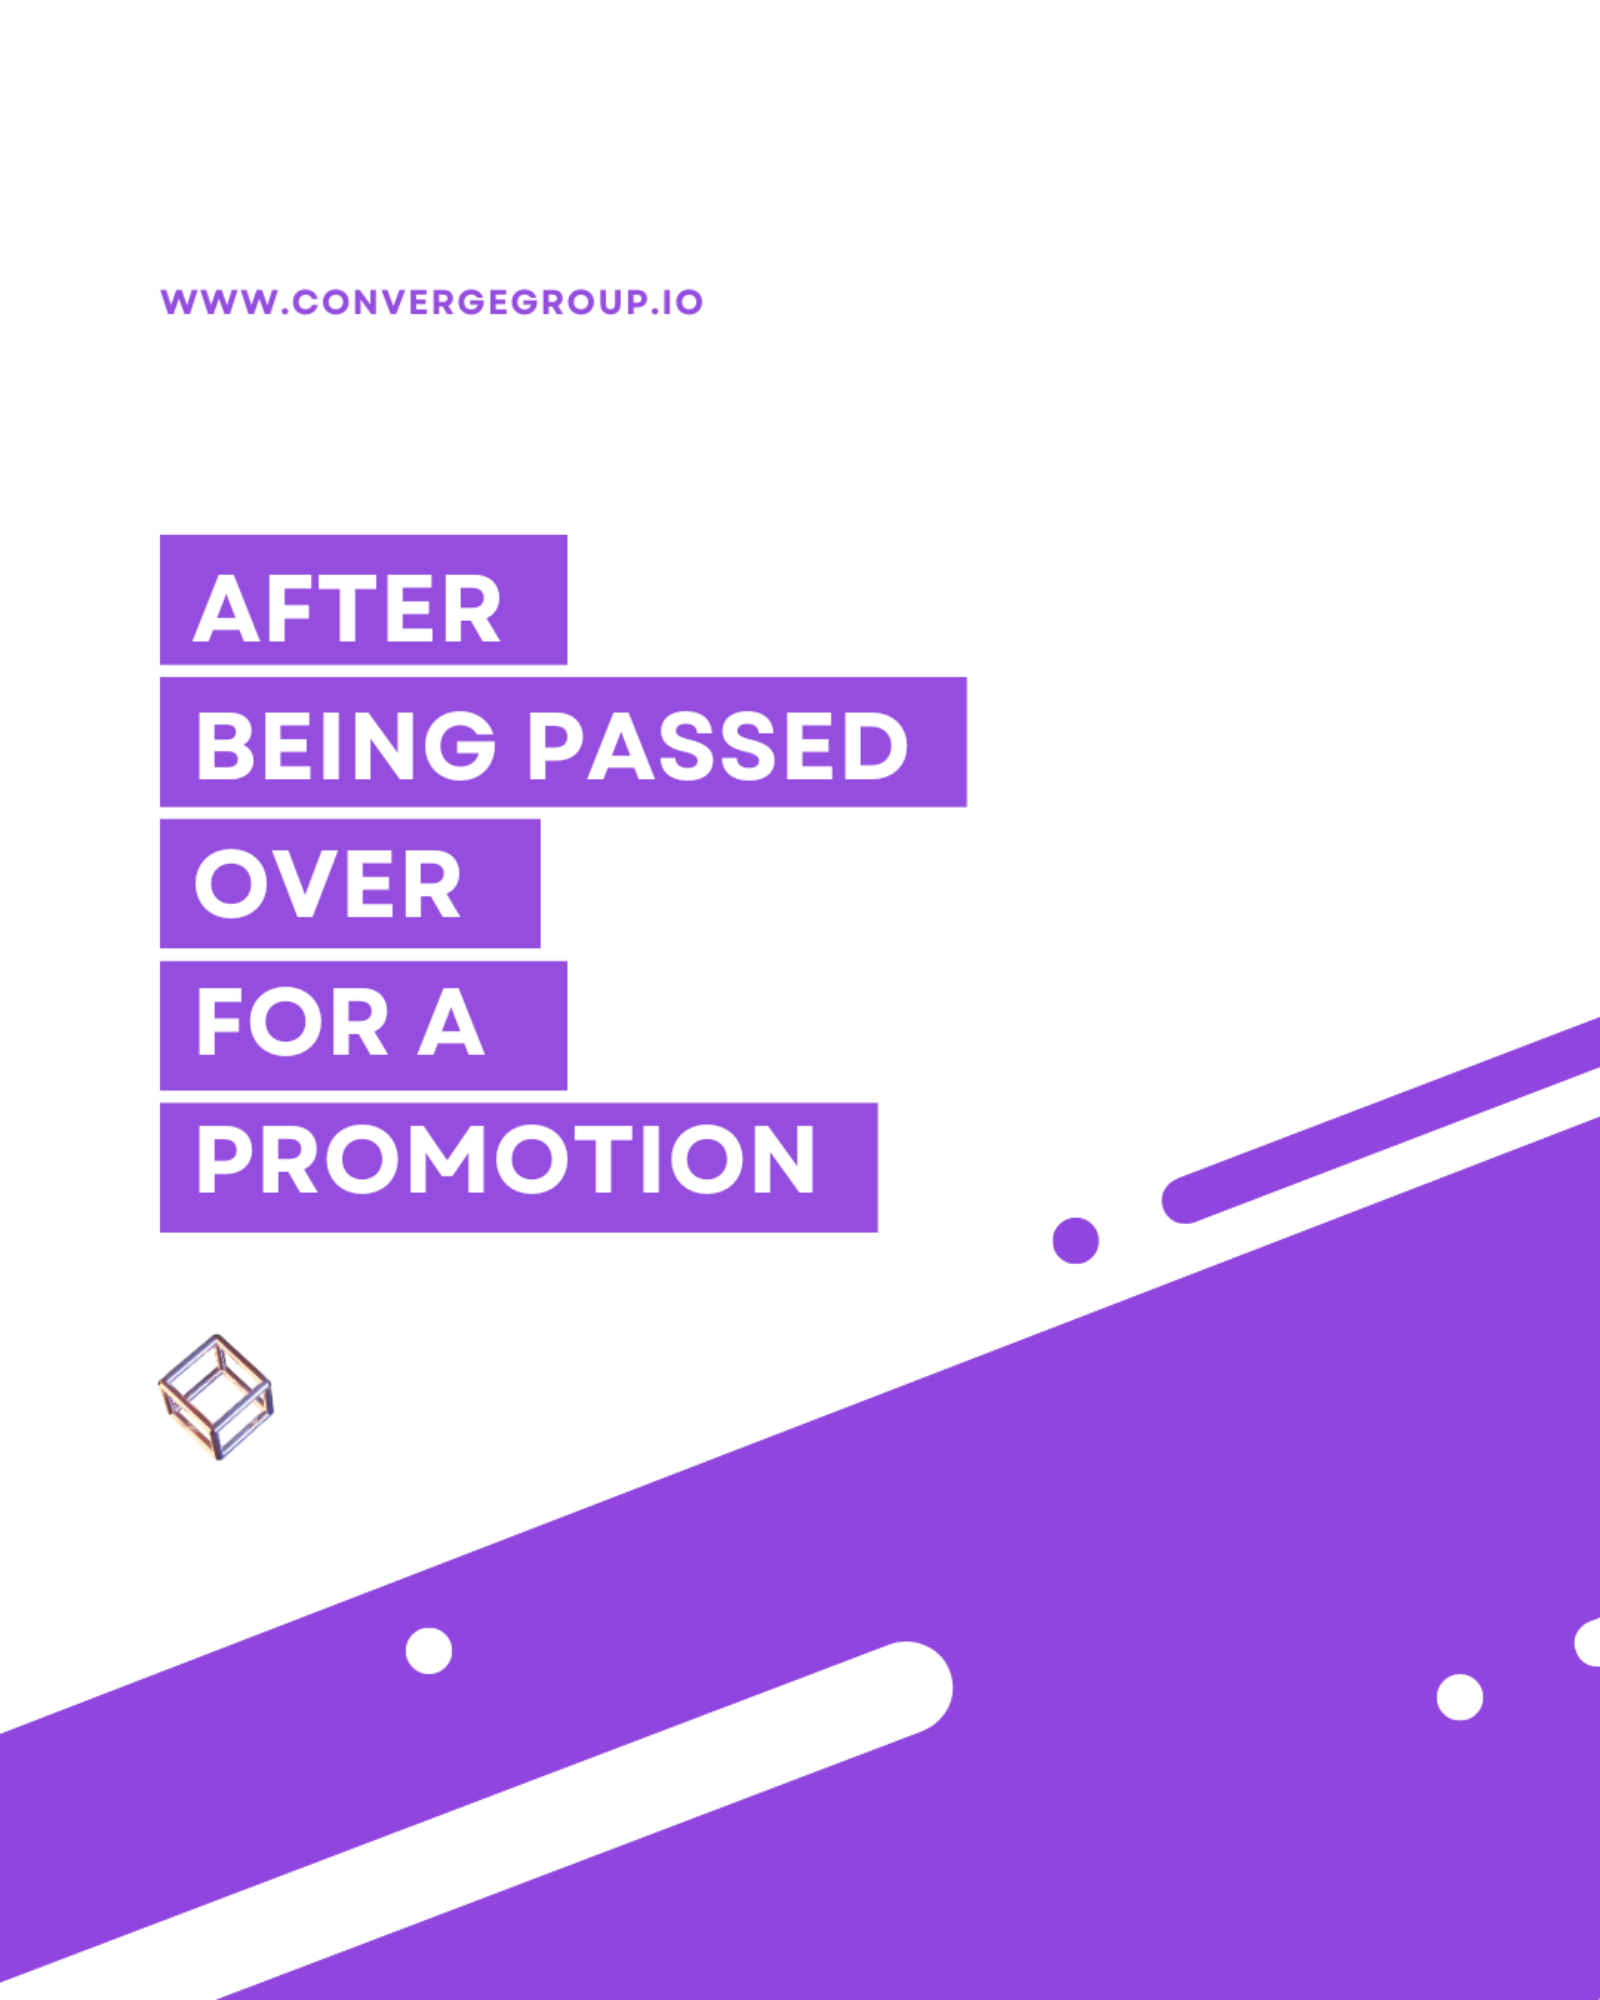 So You’ve Been Passed Over For A Promotion